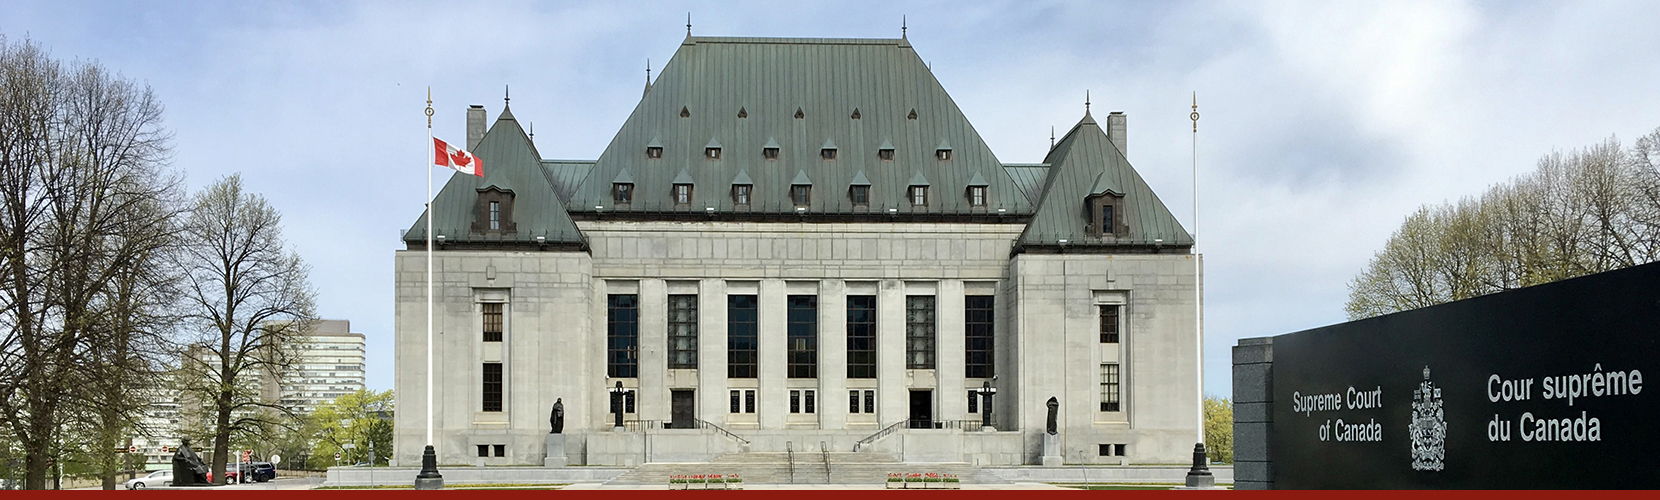 Supreme Court of Canada Building